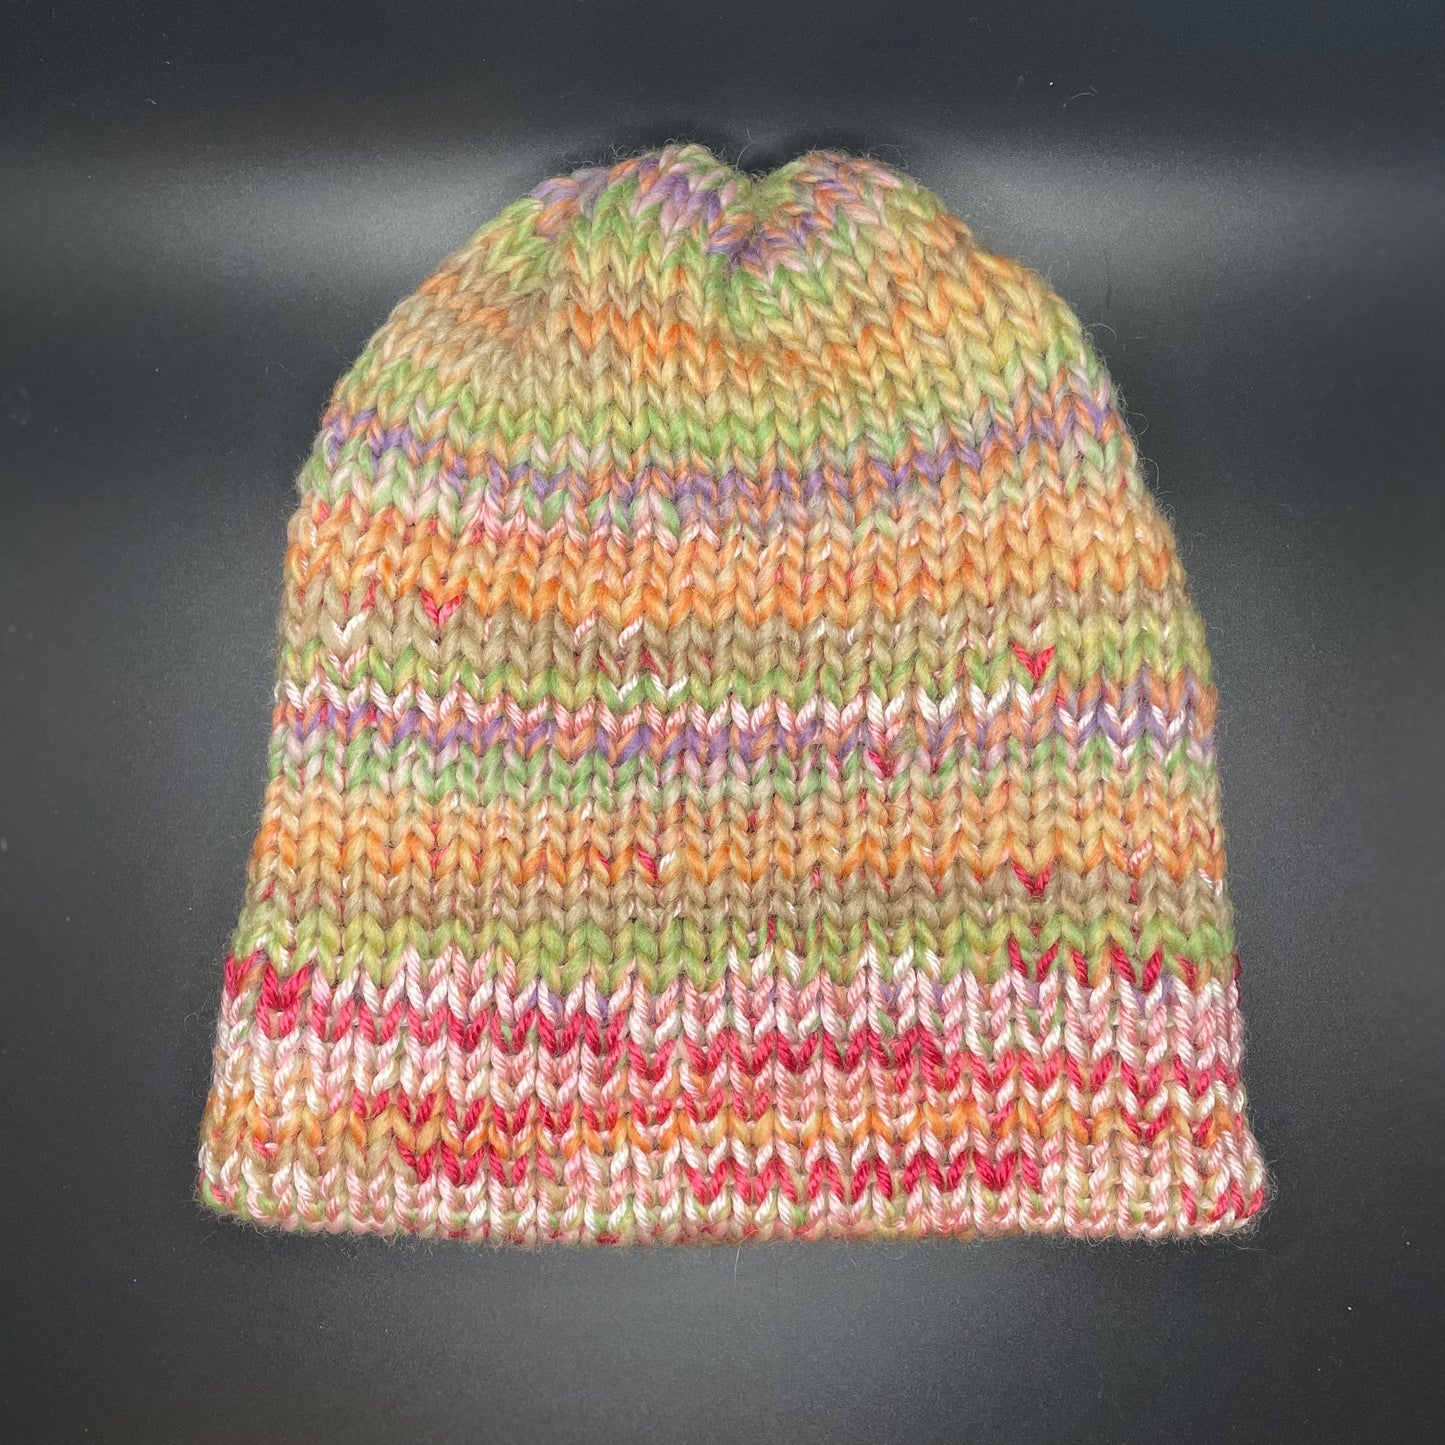 Young child (lower elementary) sized handmade beanie